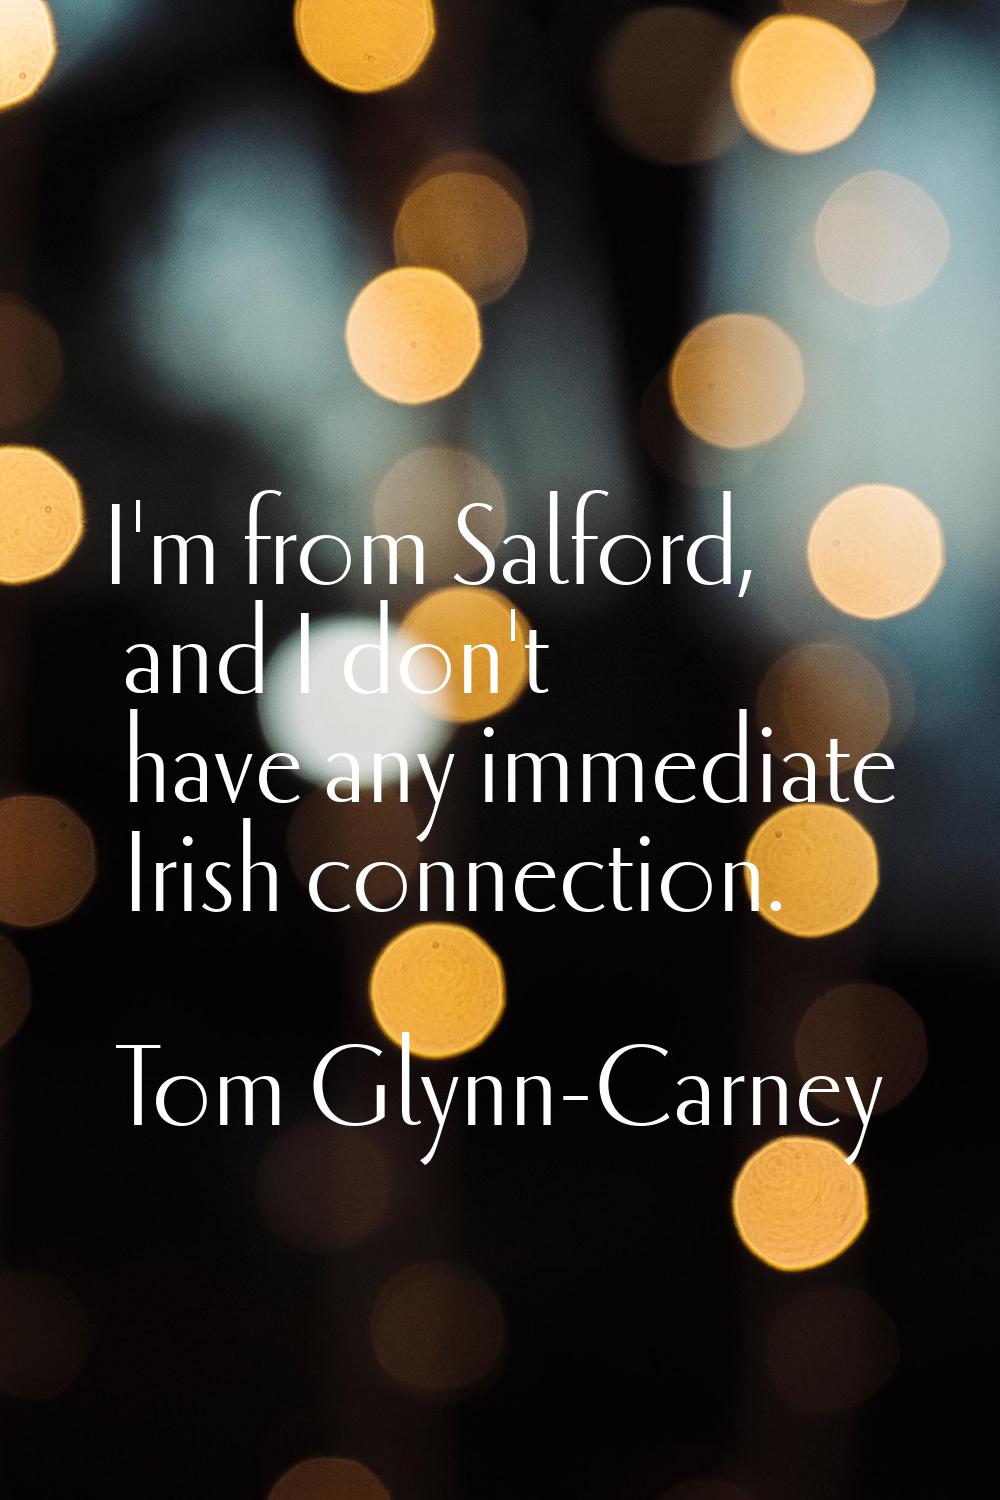 I'm from Salford, and I don't have any immediate Irish connection.